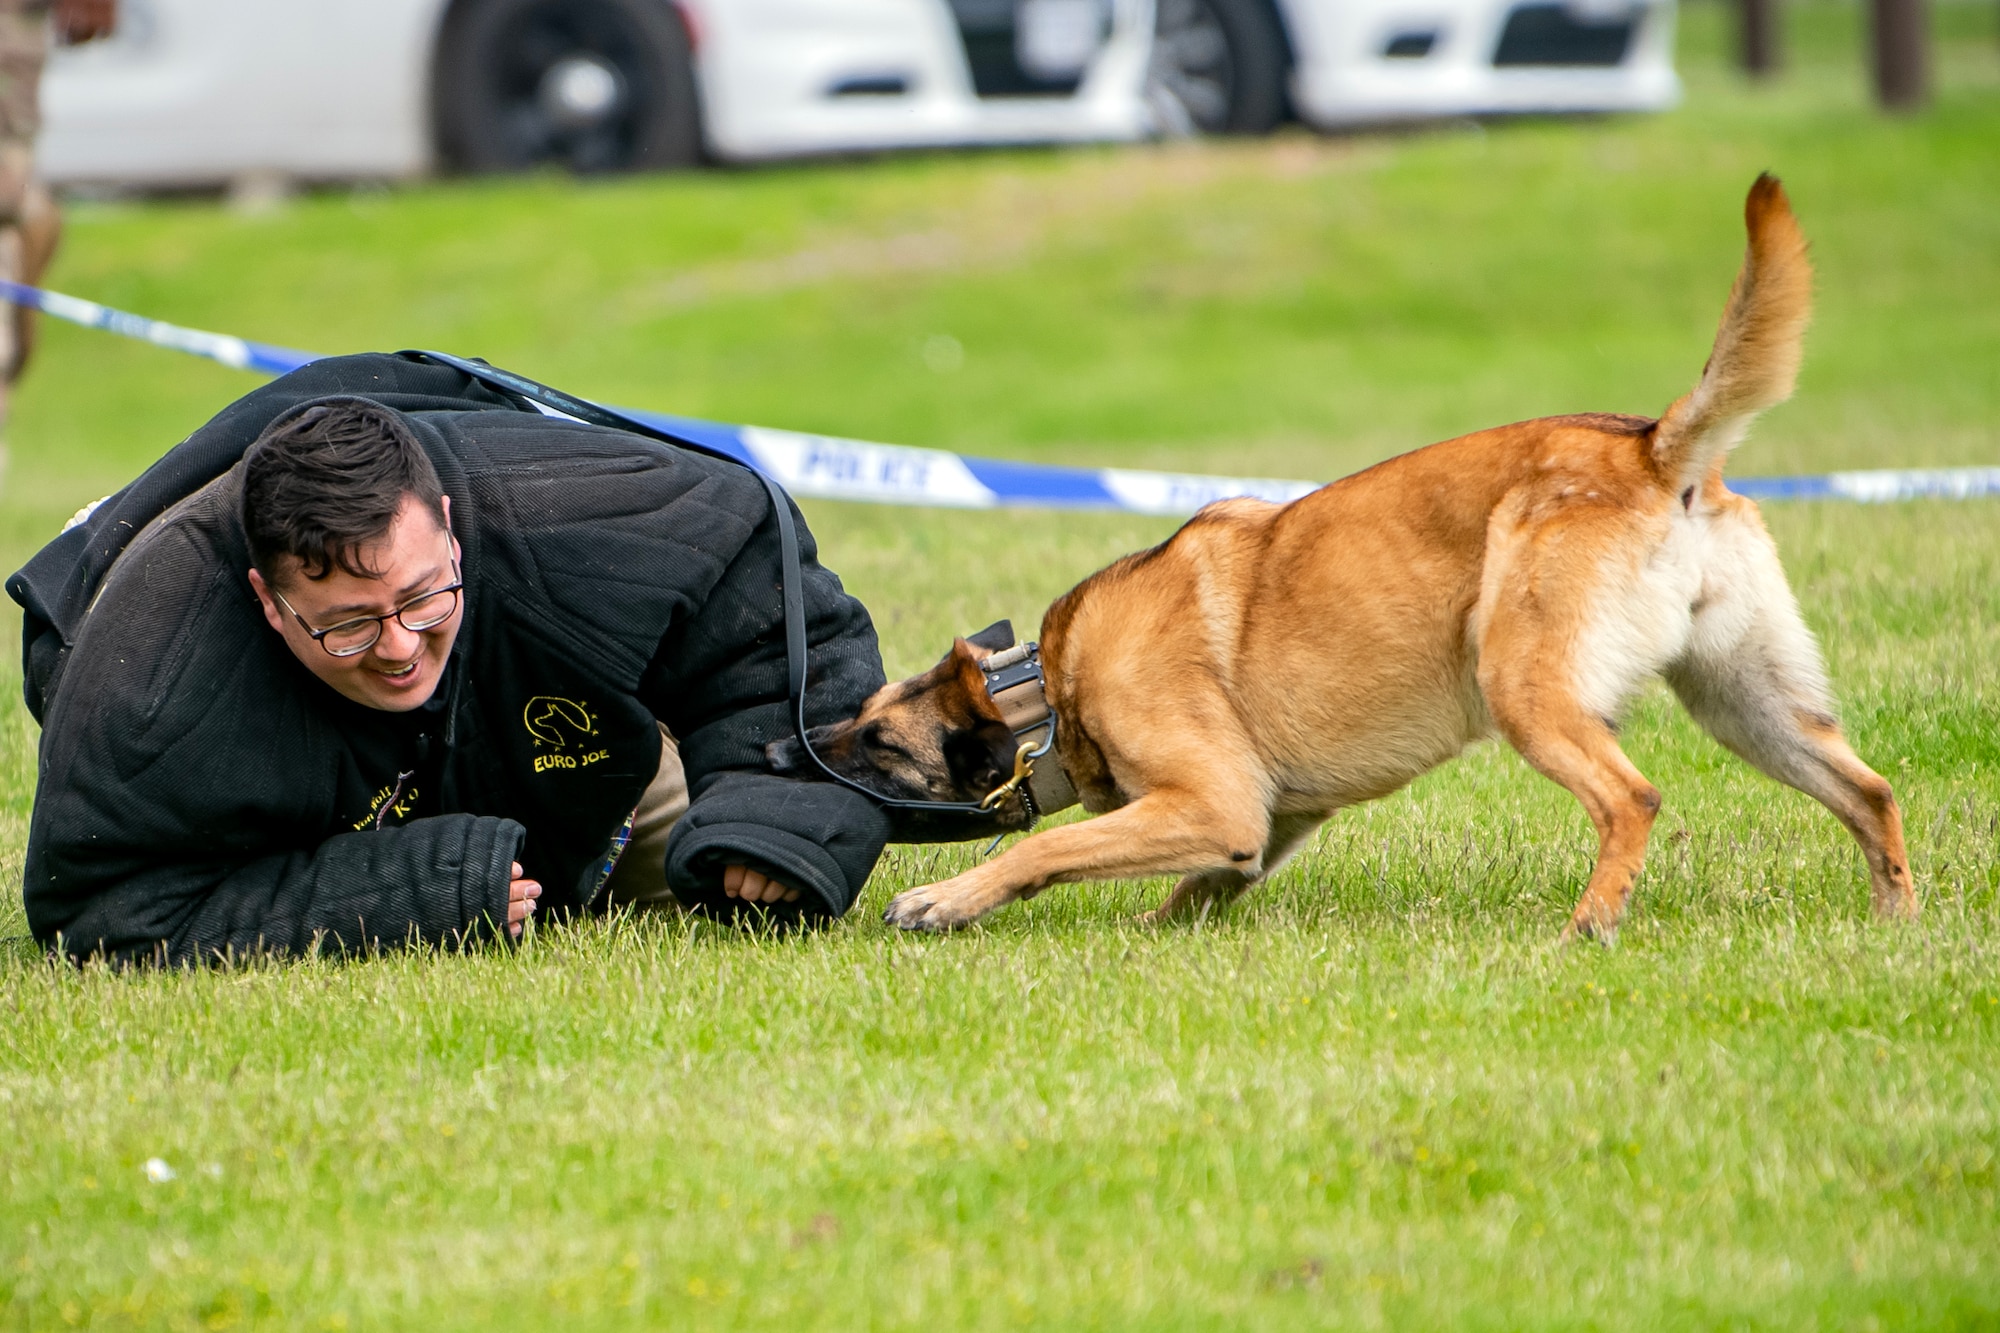 Military Working Dog Uta apprehends a simulated suspect during a demonstration at RAF Alconbury, England, May 18, 2023. The demonstration was a part of National Police Week where members from SFS engaged with and demonstrated police capabilities to students from Alconbury Elementary school. (U.S. Air Force photo by Staff Sgt. Eugene Oliver)